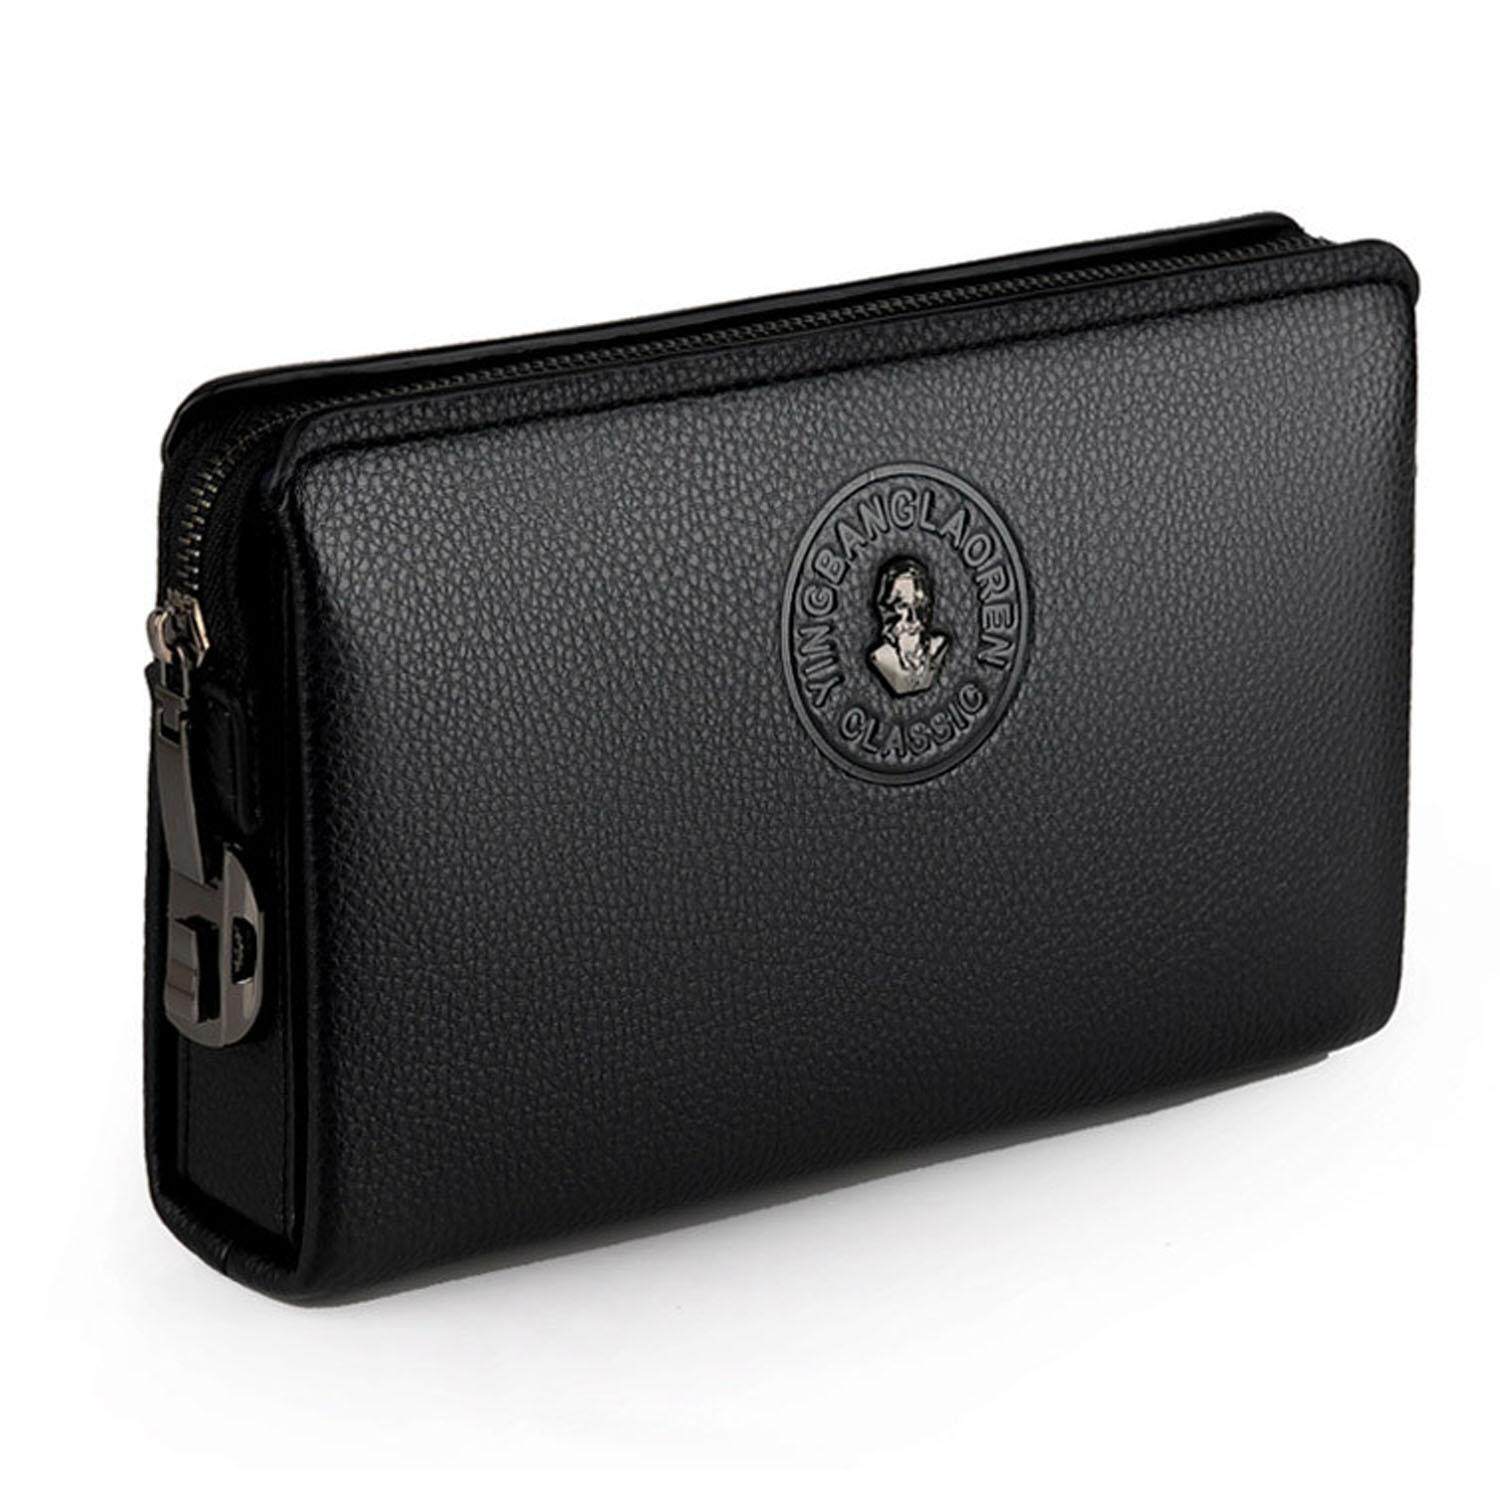 NDM pure leather clutch purse with chain (Black) - UMSAS E-commerce-cheohanoi.vn